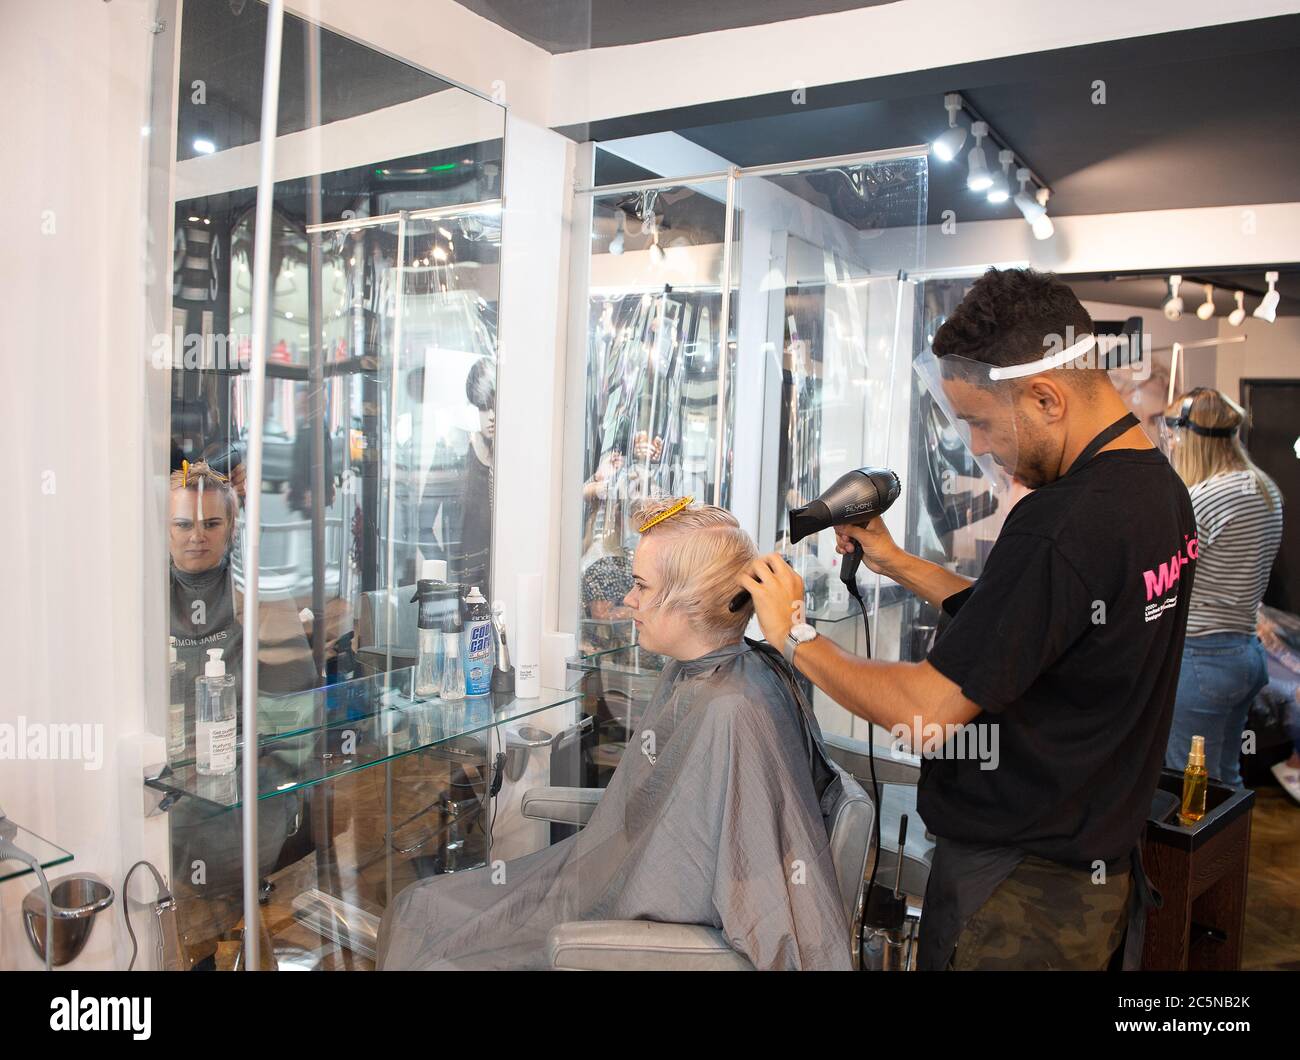 Eton, Windsor, Berkshire, UK. 4th July, 2020. Hairdressers at the Simon James salon in Eton High Street, Windsor, Berkshire were hectic this morning as hairdressers were allowed to reopen in England from today for the first time since the Coronavirus Covid-19 lockdown in March. Credit: Maureen McLean/Alamy Live News Stock Photo